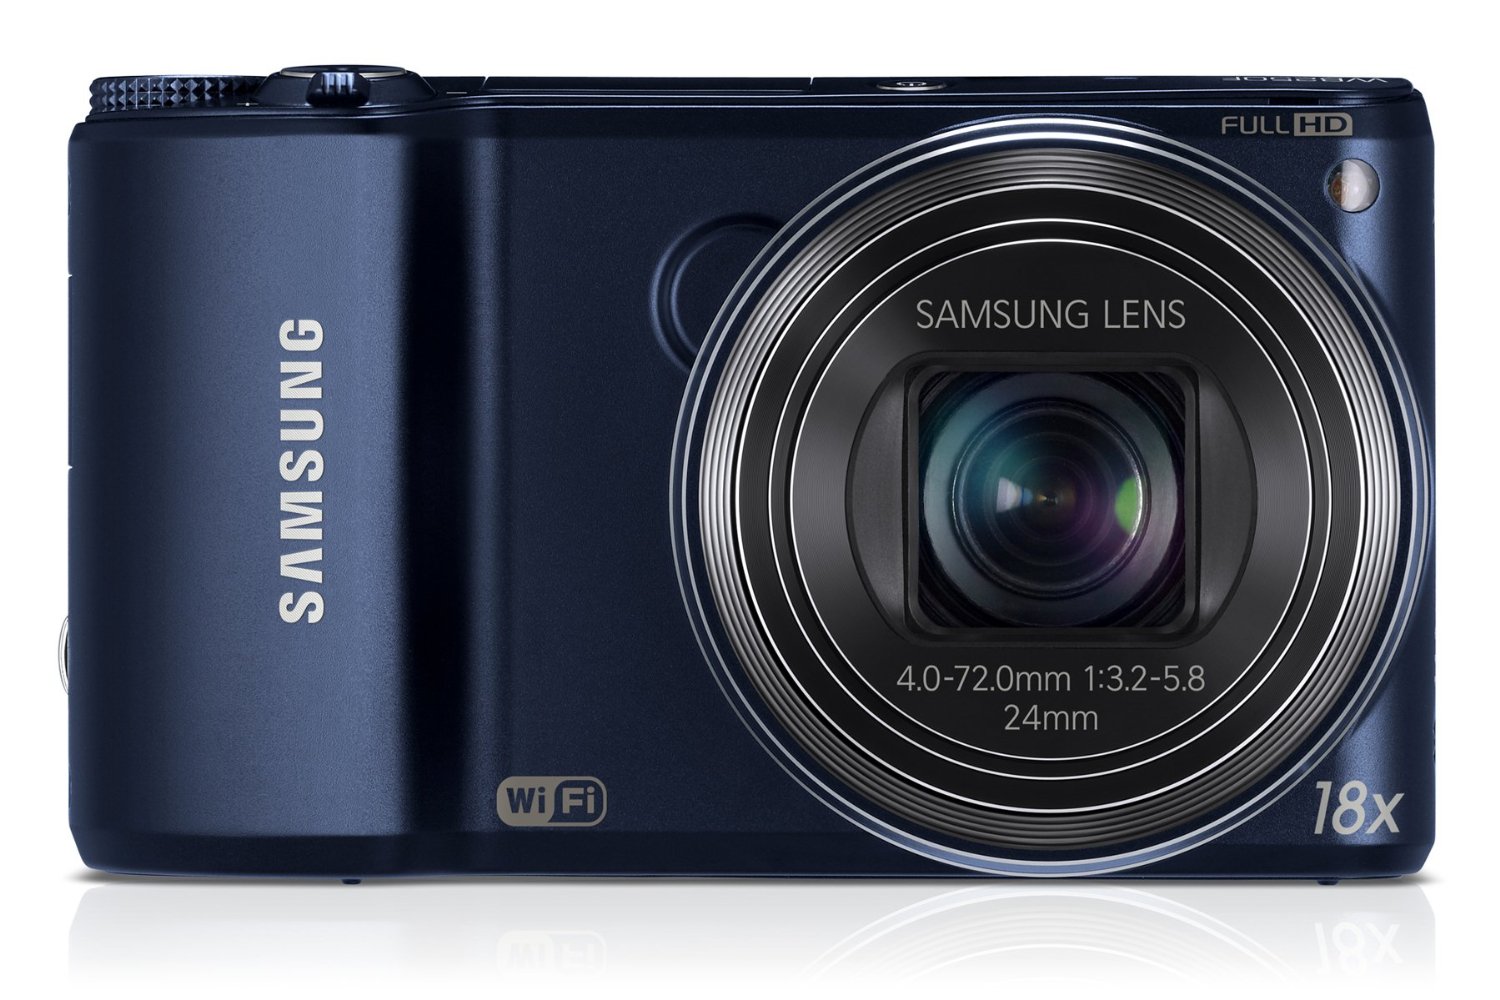 Samsung WB250F Smart Camera 2.0 with Built-In Wi-Fi Connectivity Cobalt Black (Dark Blue) (14MP CMOS, 18x Optical Zoom) 3.0 inch HVGA Touch Screen